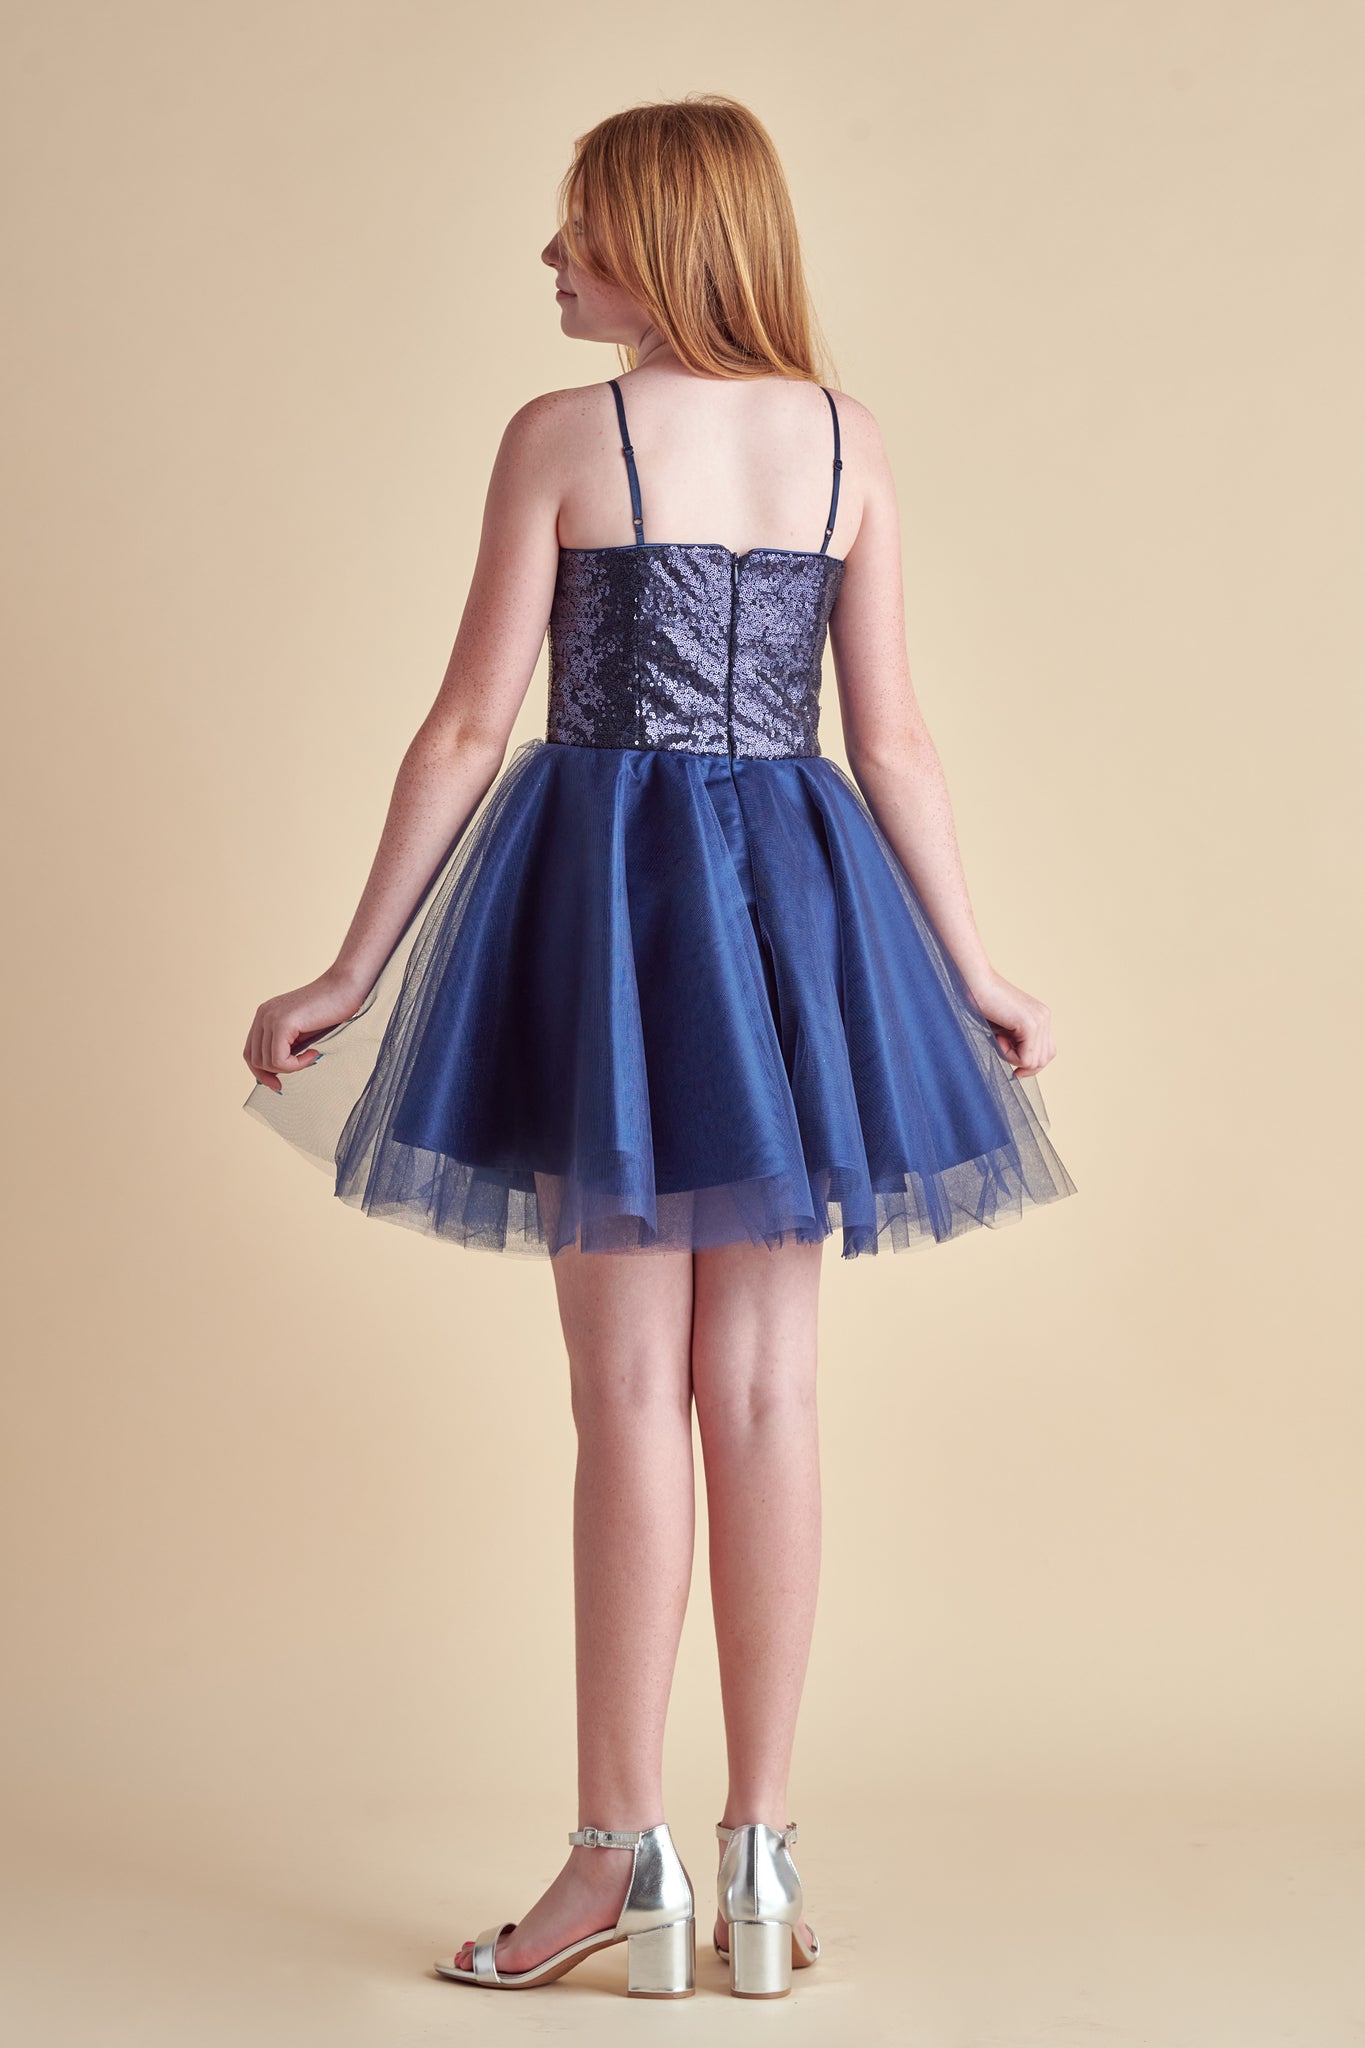 Red haired girl in a navy sequin bodice dress with full tulle skirt and silver shoe.